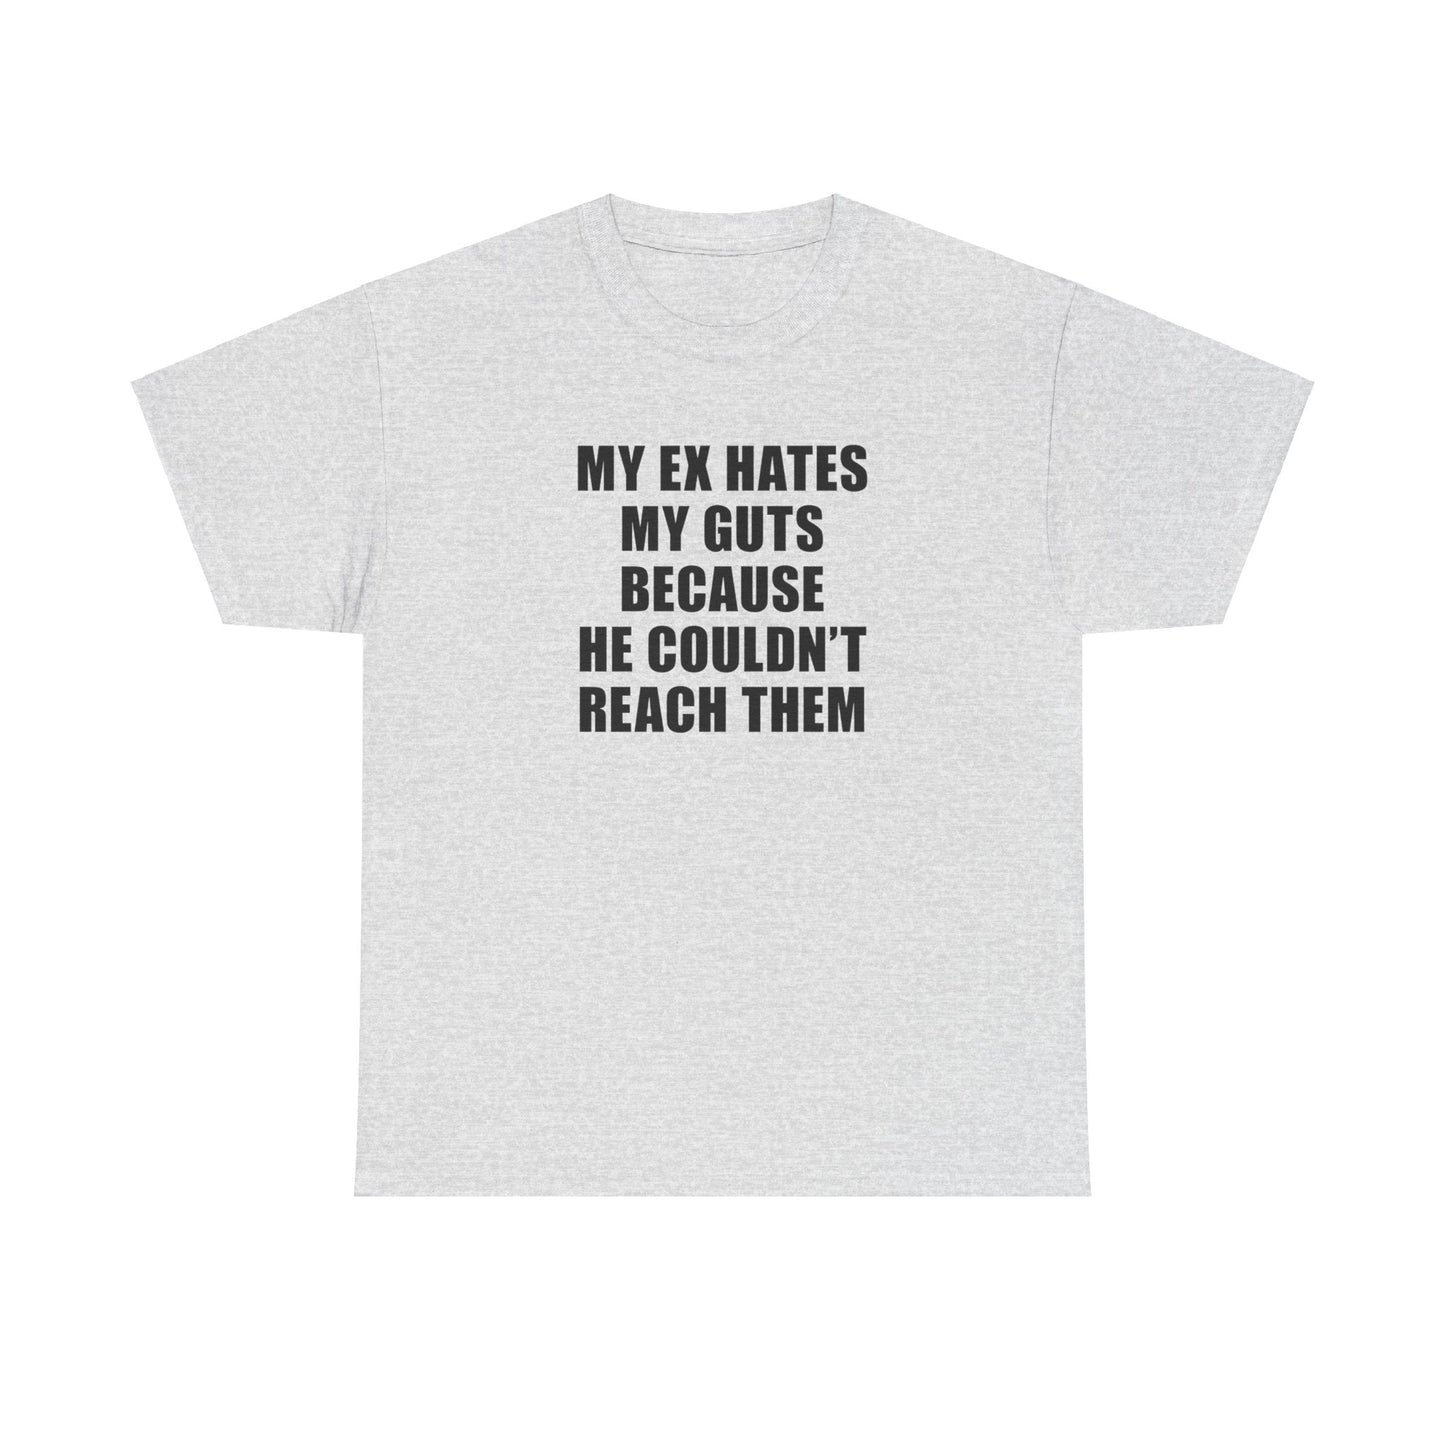 MY EX HATES MY GUTS BECAUSE HE COULDN'T REACH THEM T-SHIRT